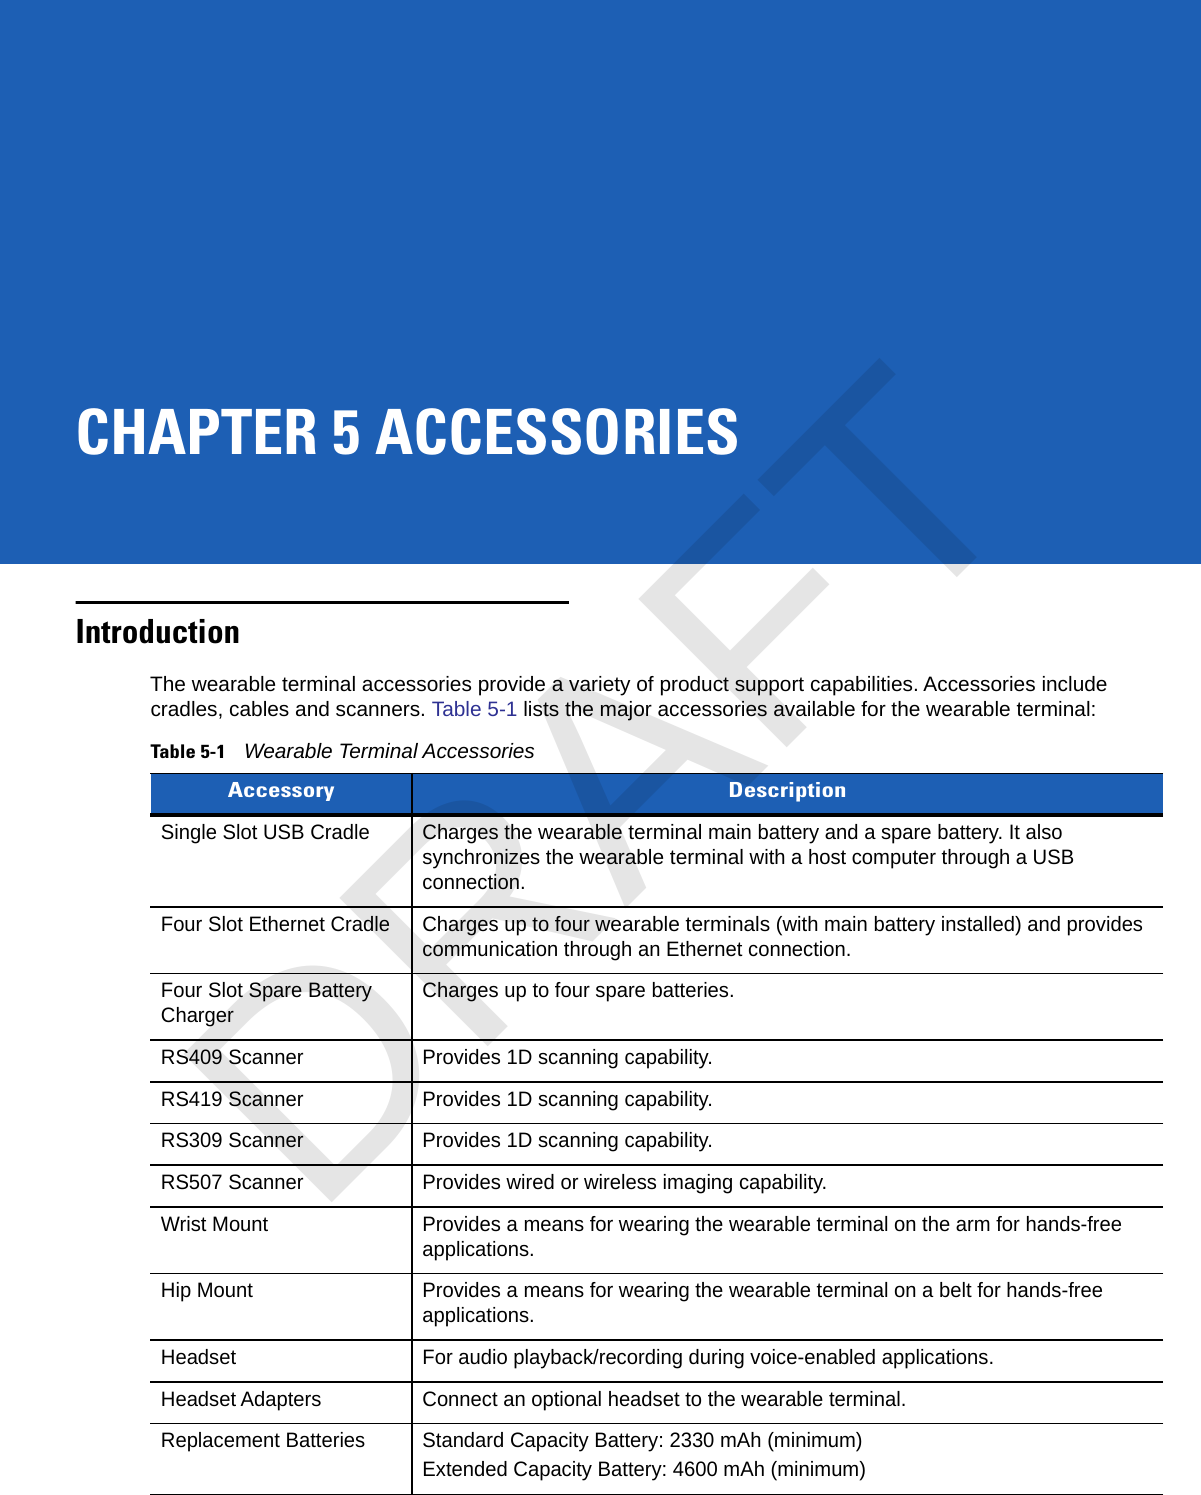 CHAPTER 5 ACCESSORIESIntroductionThe wearable terminal accessories provide a variety of product support capabilities. Accessories include cradles, cables and scanners. Table 5-1 lists the major accessories available for the wearable terminal:Table 5-1Wearable Terminal Accessories Accessory DescriptionSingle Slot USB Cradle Charges the wearable terminal main battery and a spare battery. It also synchronizes the wearable terminal with a host computer through a USB connection.Four Slot Ethernet Cradle Charges up to four wearable terminals (with main battery installed) and provides communication through an Ethernet connection.Four Slot Spare Battery Charger Charges up to four spare batteries.RS409 Scanner Provides 1D scanning capability.RS419 Scanner Provides 1D scanning capability.RS309 Scanner Provides 1D scanning capability.RS507 Scanner Provides wired or wireless imaging capability.Wrist Mount Provides a means for wearing the wearable terminal on the arm for hands-free applications.Hip Mount Provides a means for wearing the wearable terminal on a belt for hands-free applications.Headset For audio playback/recording during voice-enabled applications.Headset Adapters Connect an optional headset to the wearable terminal.Replacement Batteries Standard Capacity Battery: 2330 mAh (minimum)Extended Capacity Battery: 4600 mAh (minimum)DRAFT